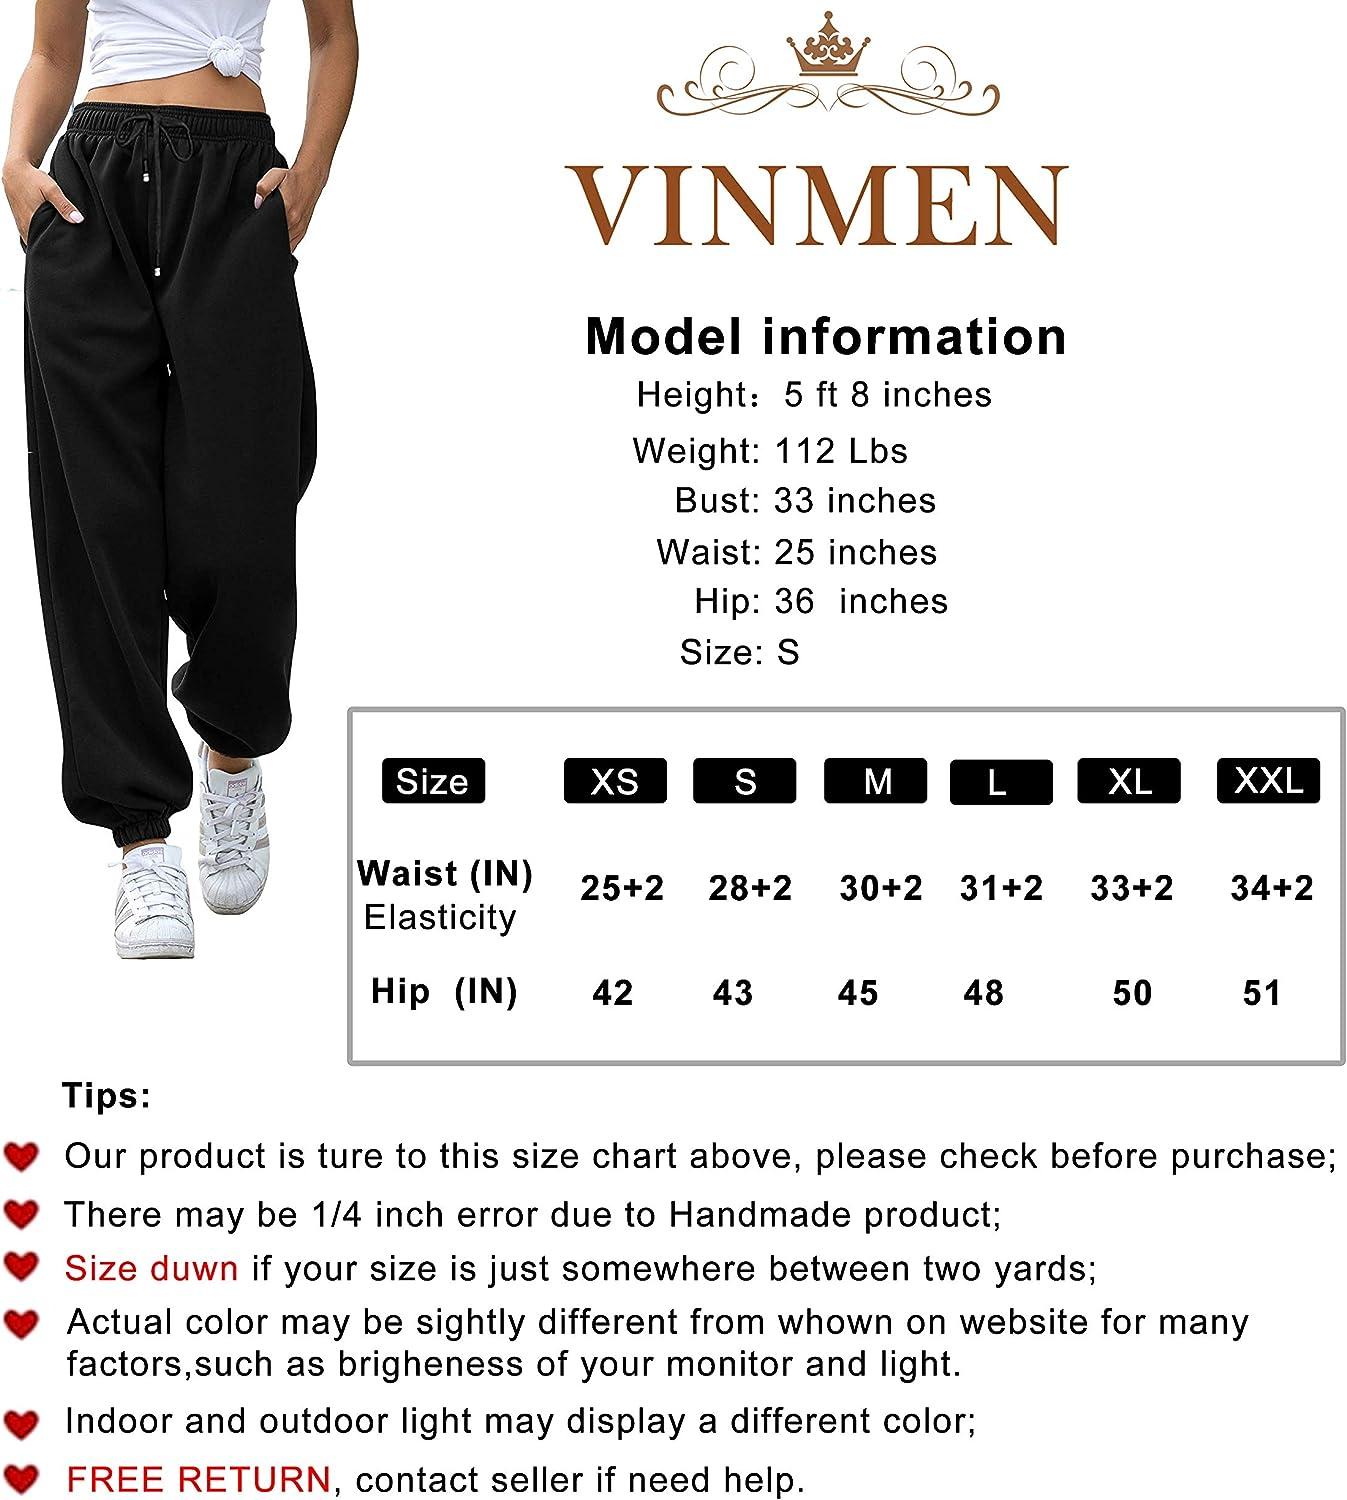 Women's Casual Jogger Thick Sweatpants Cotton High Waist Workout Pants  Cinch Bottom Trousers with Pockets